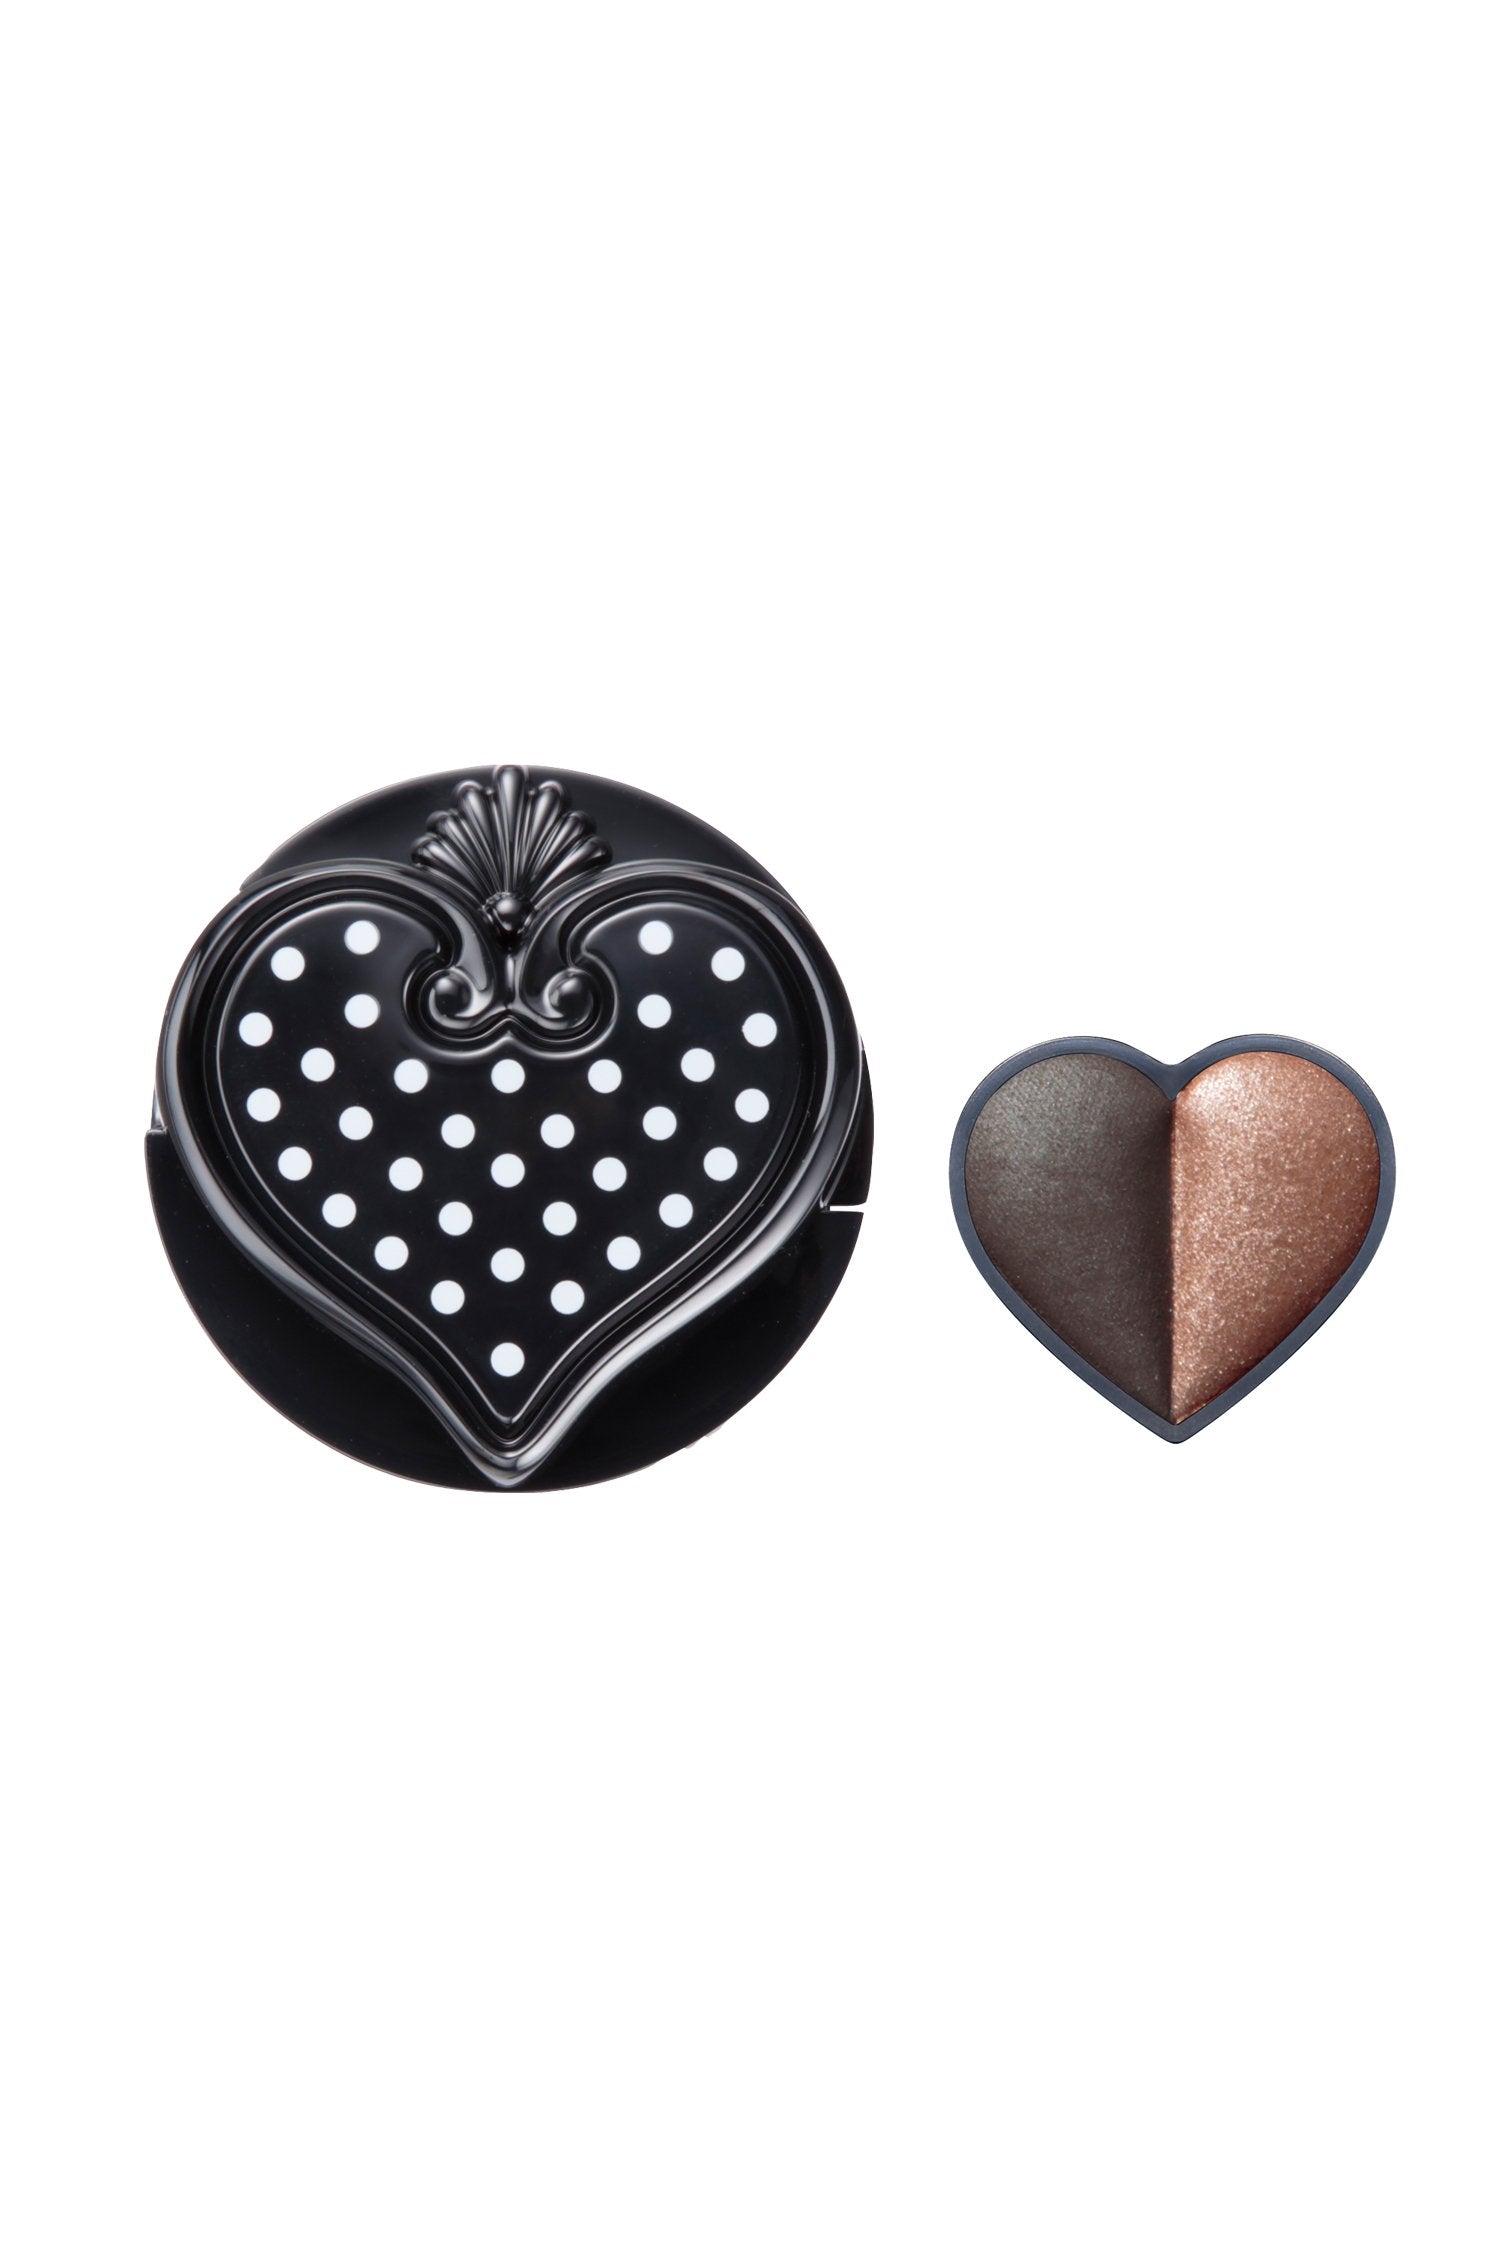 Sui black eye color RICH BROWN DUO Round Black container with a heart shaped lid with white dots, and a seashell 